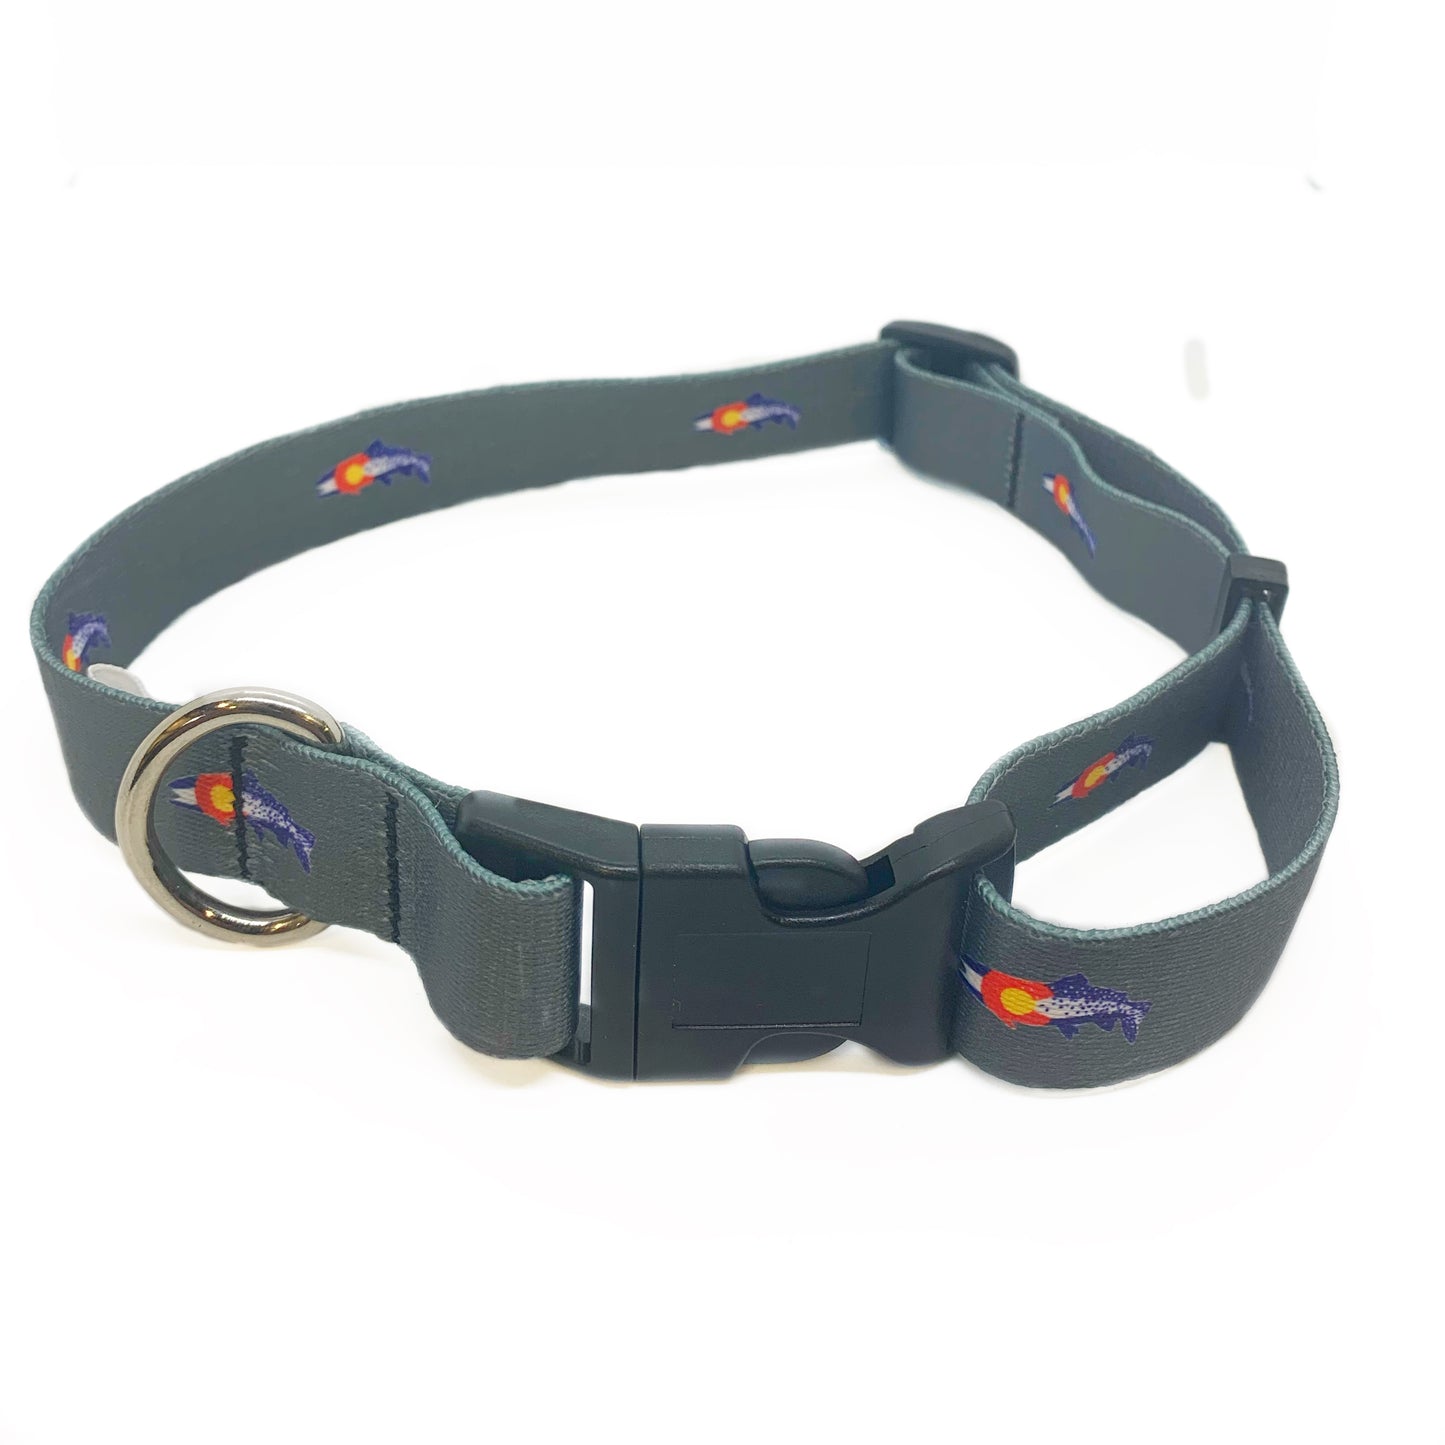 A gray nylon dog collar is shown. Trout in Colorado flag colors are printed on it.